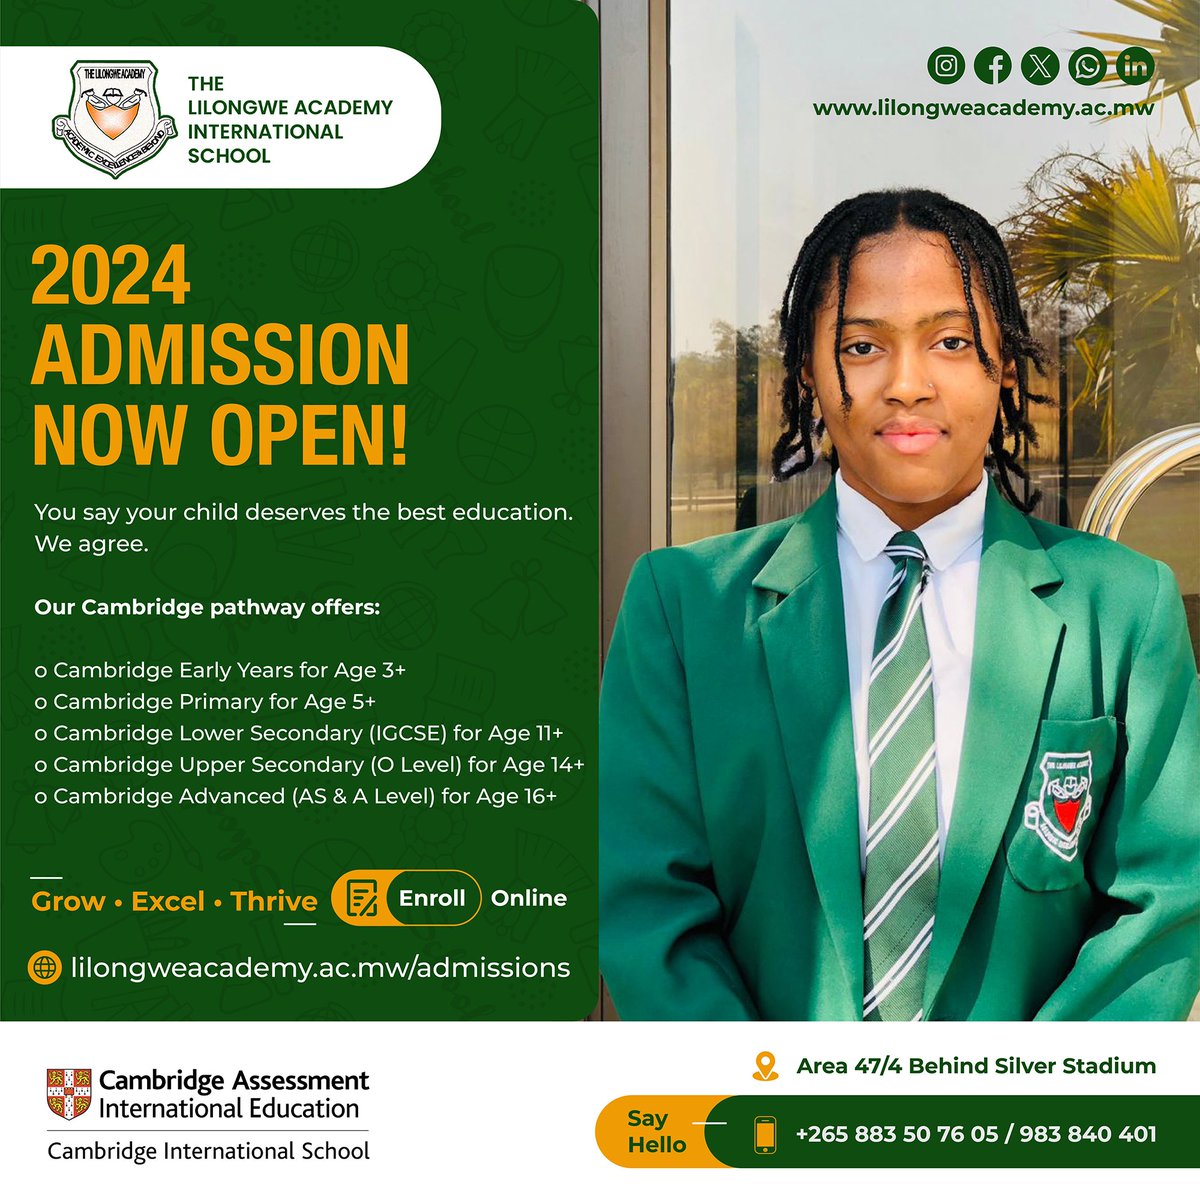 2024 Admission Now Open! 🏫

🎒 Cambridge Early Years for Age 3+
🎒 Cambridge Primary for Age 5+
🎒 Cambridge Lower Secondary (IGCSE) for Age 11+
🎒 Cambridge Upper Secondary (O Level) for Age 14+
🎒 Cambridge Advanced (AS & A Level) for Age 16+

#EnrolToday #Cambidge